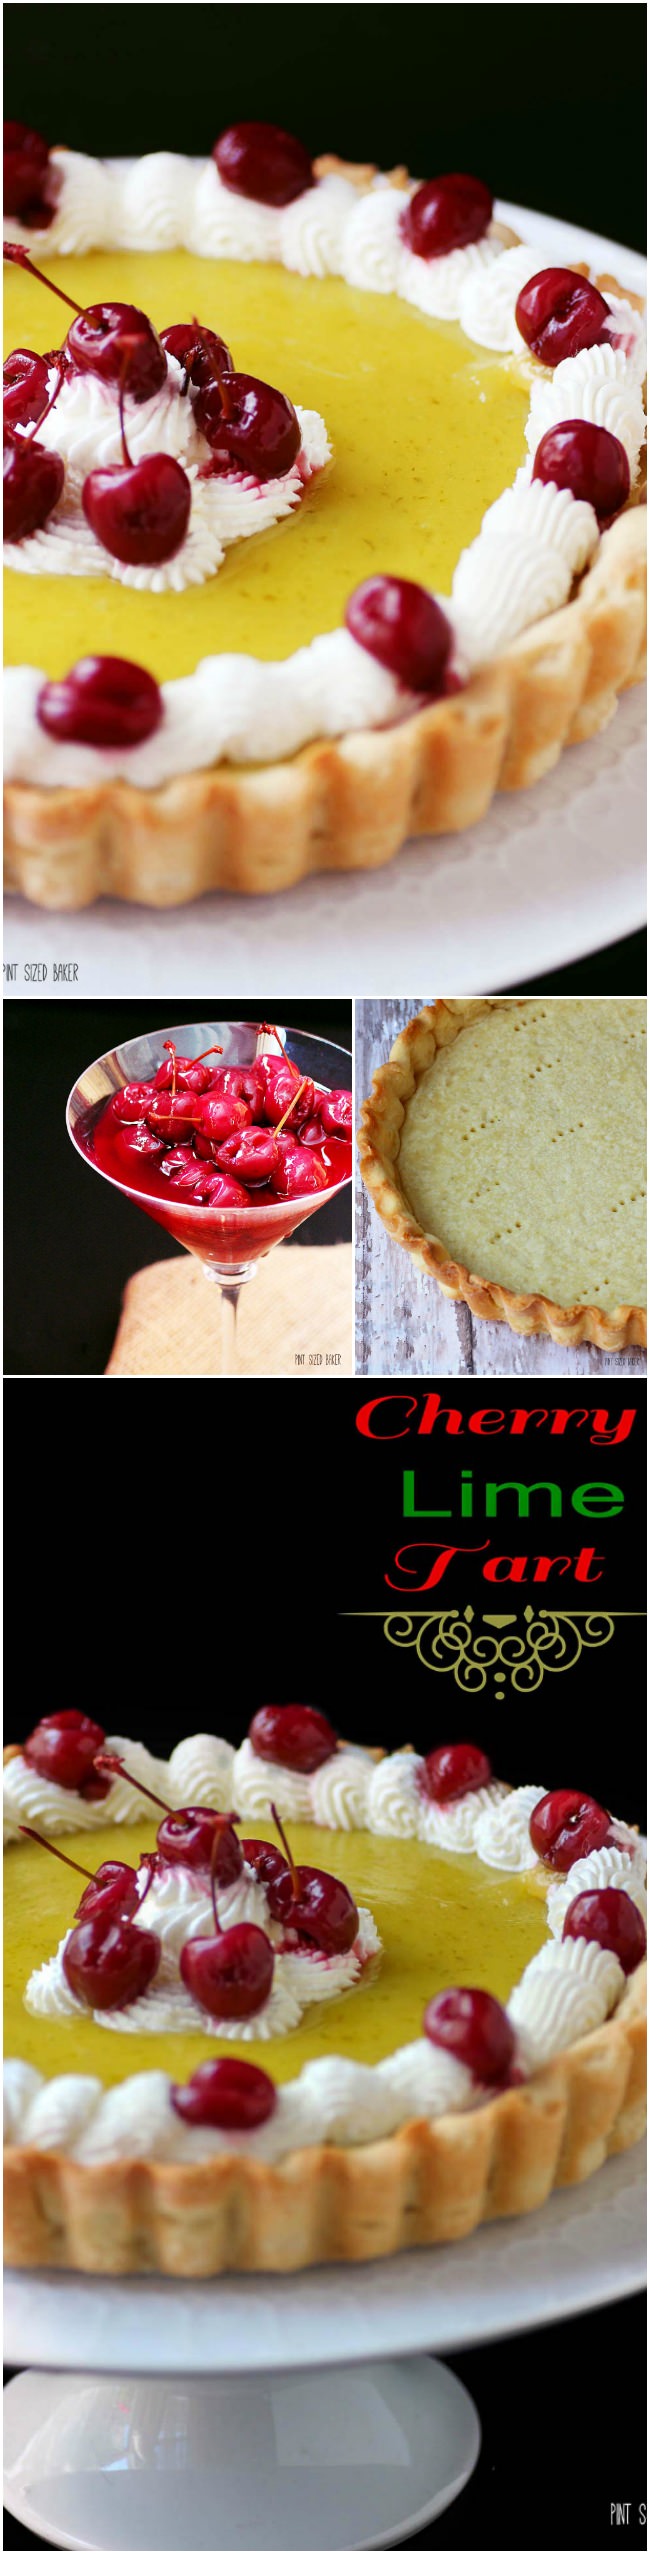 A cherry lime tart that is for all citrus lovers. Lime curd, a lime crust and homemade maraschino cherries. Totally worth the work!